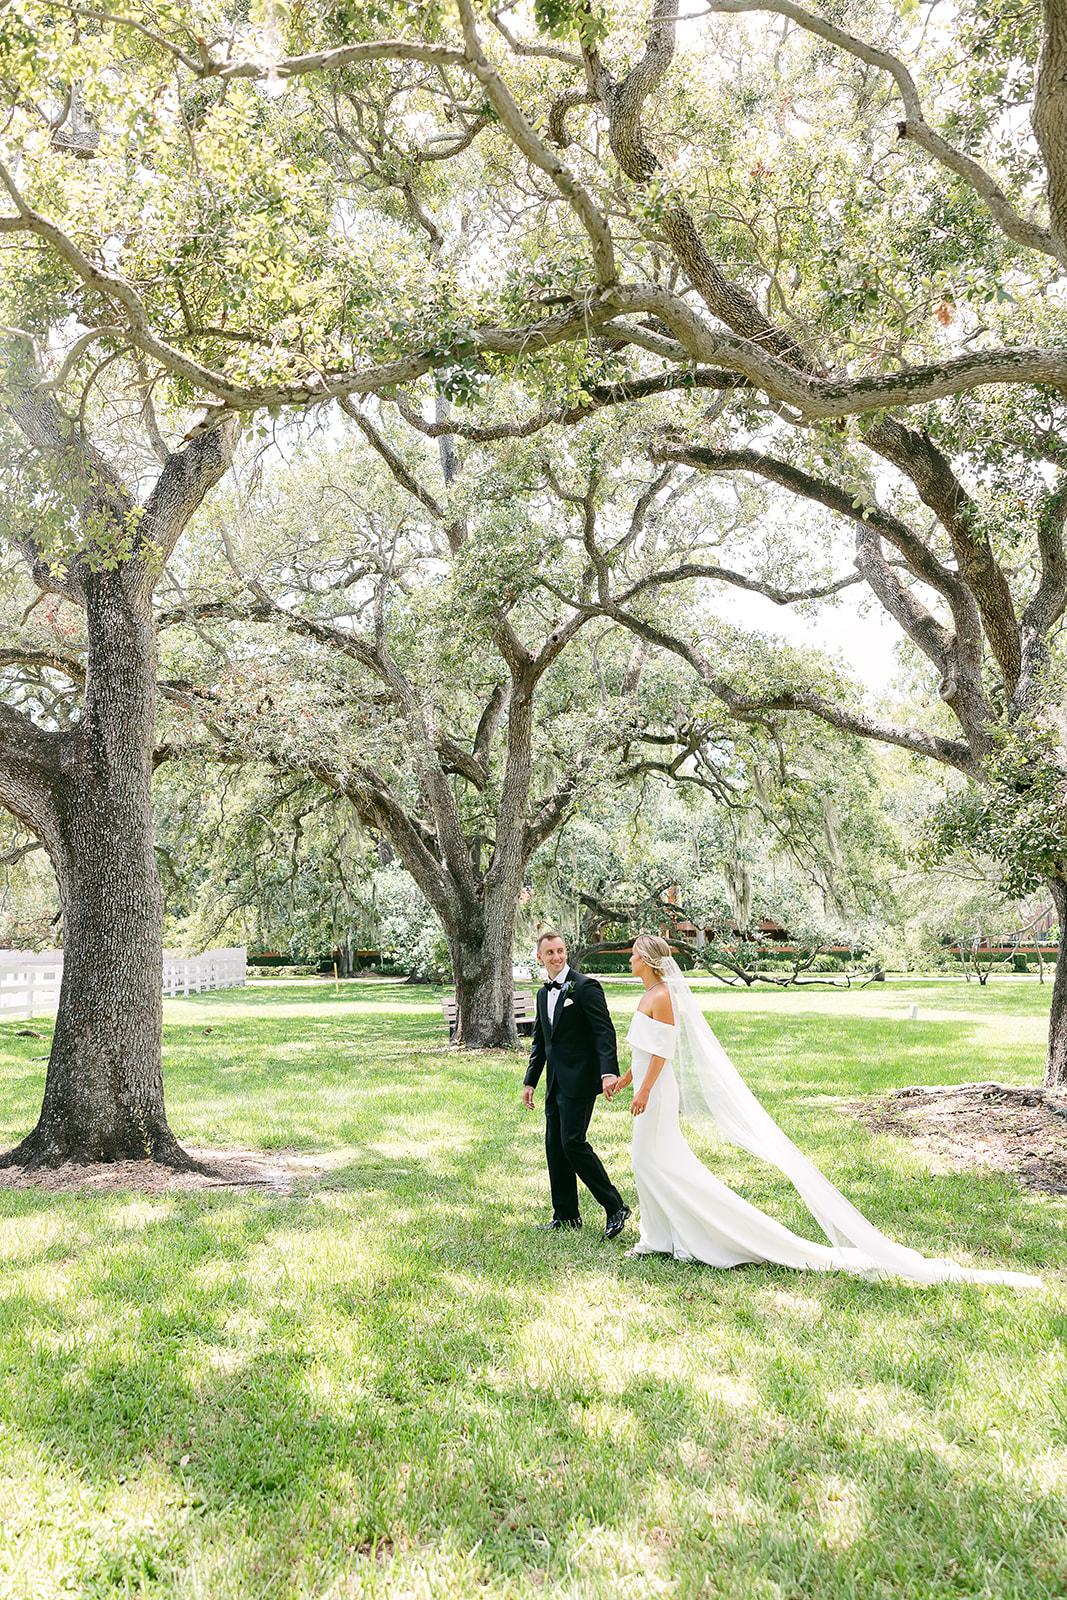 creative wedding day portrait, bride and groom in grove of trees.